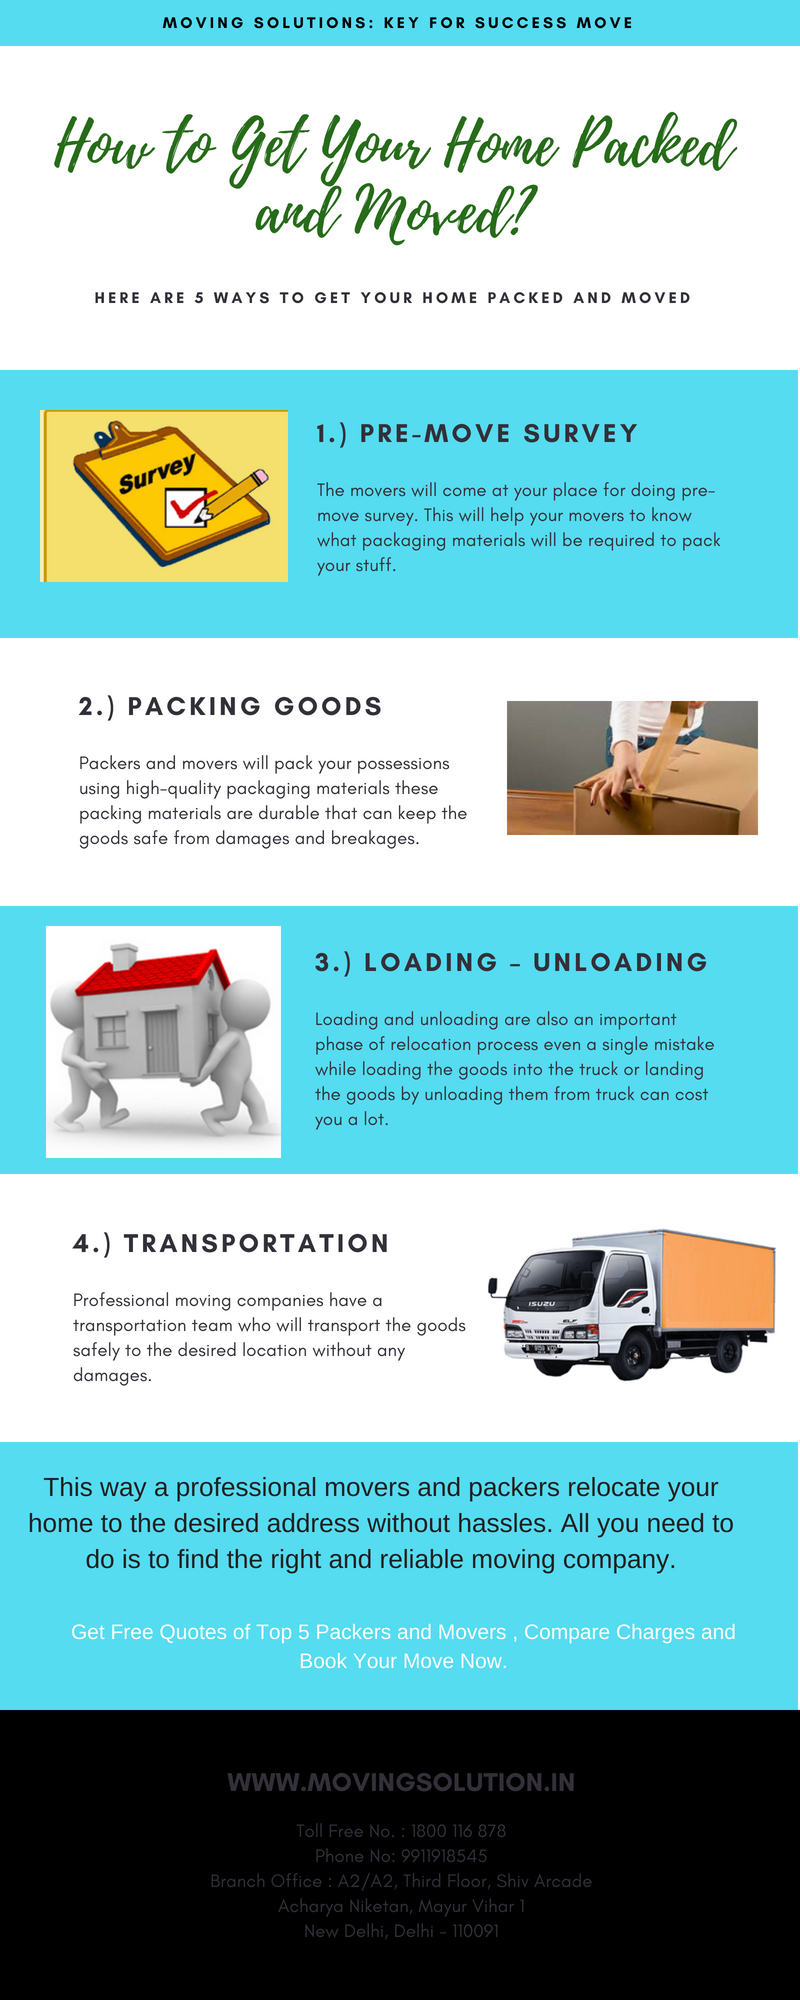 Moving Solutions- Key for success move